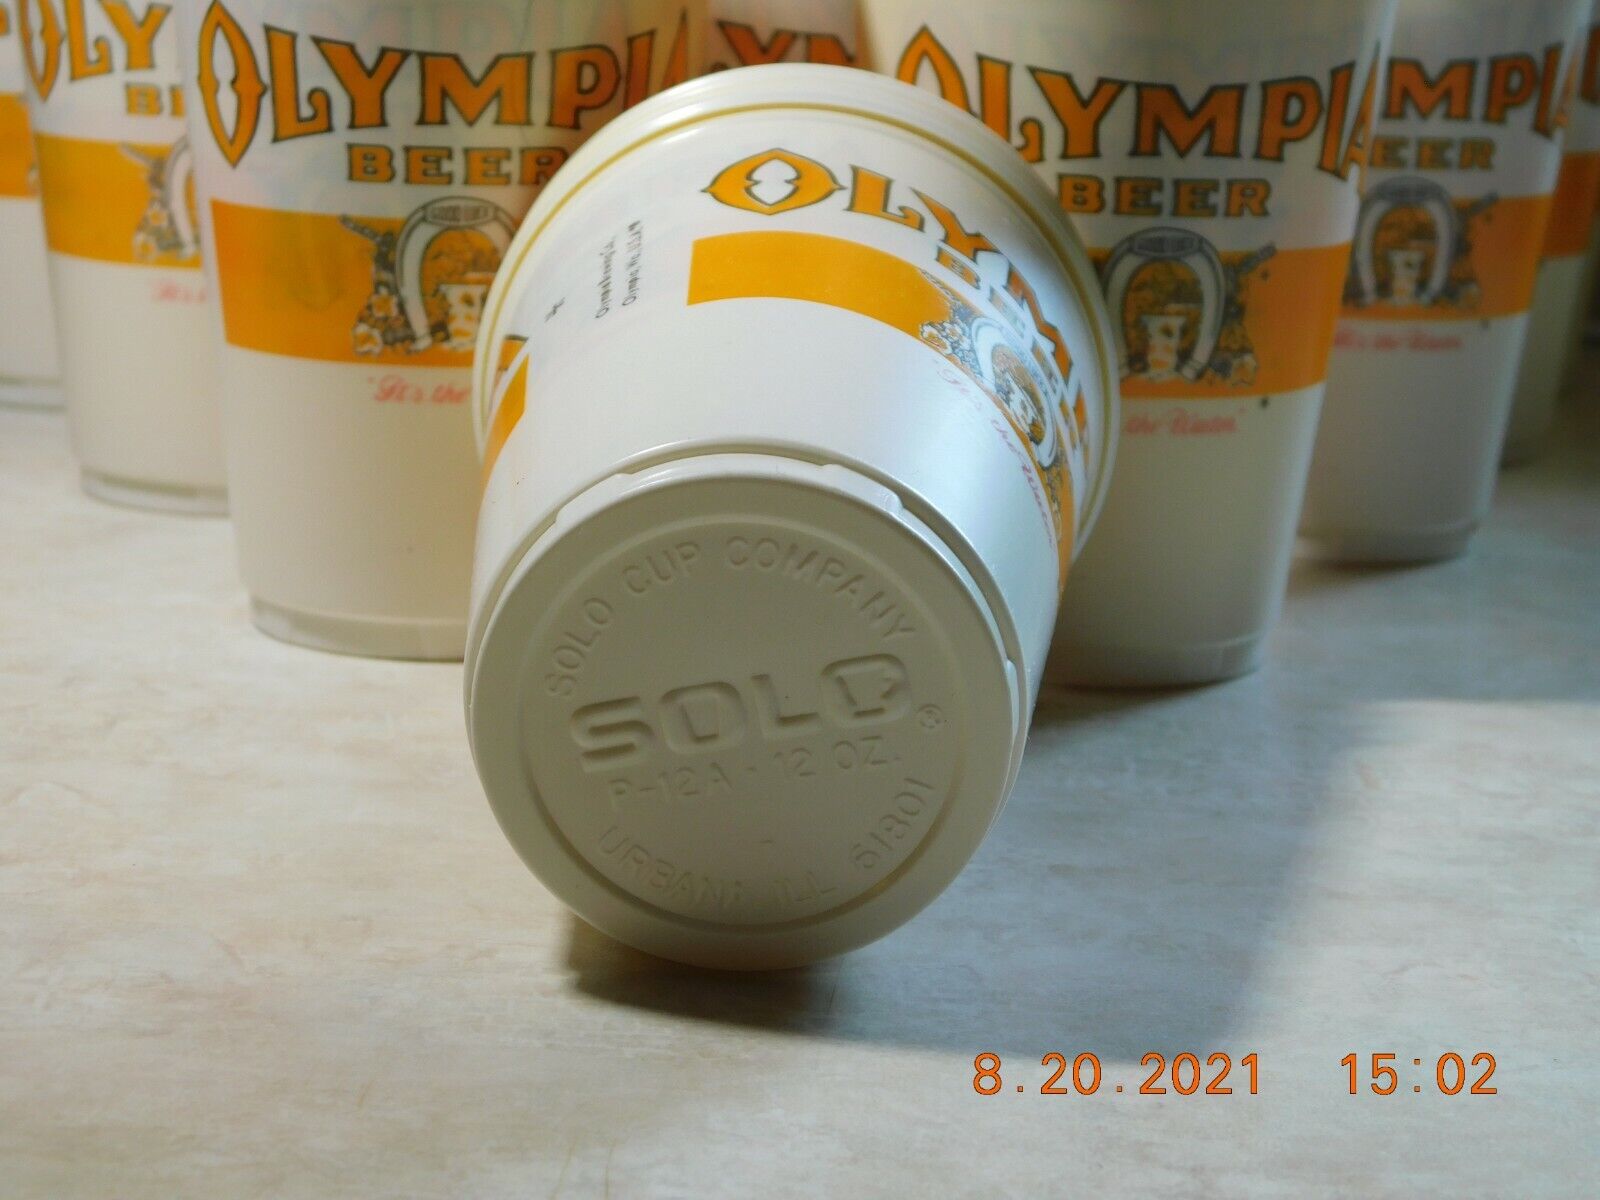 70's 80's OLYMPIA BEER Keg "It's the Water" Cups 12 oz SOLO NEW Unused  Без бренда - фотография #8